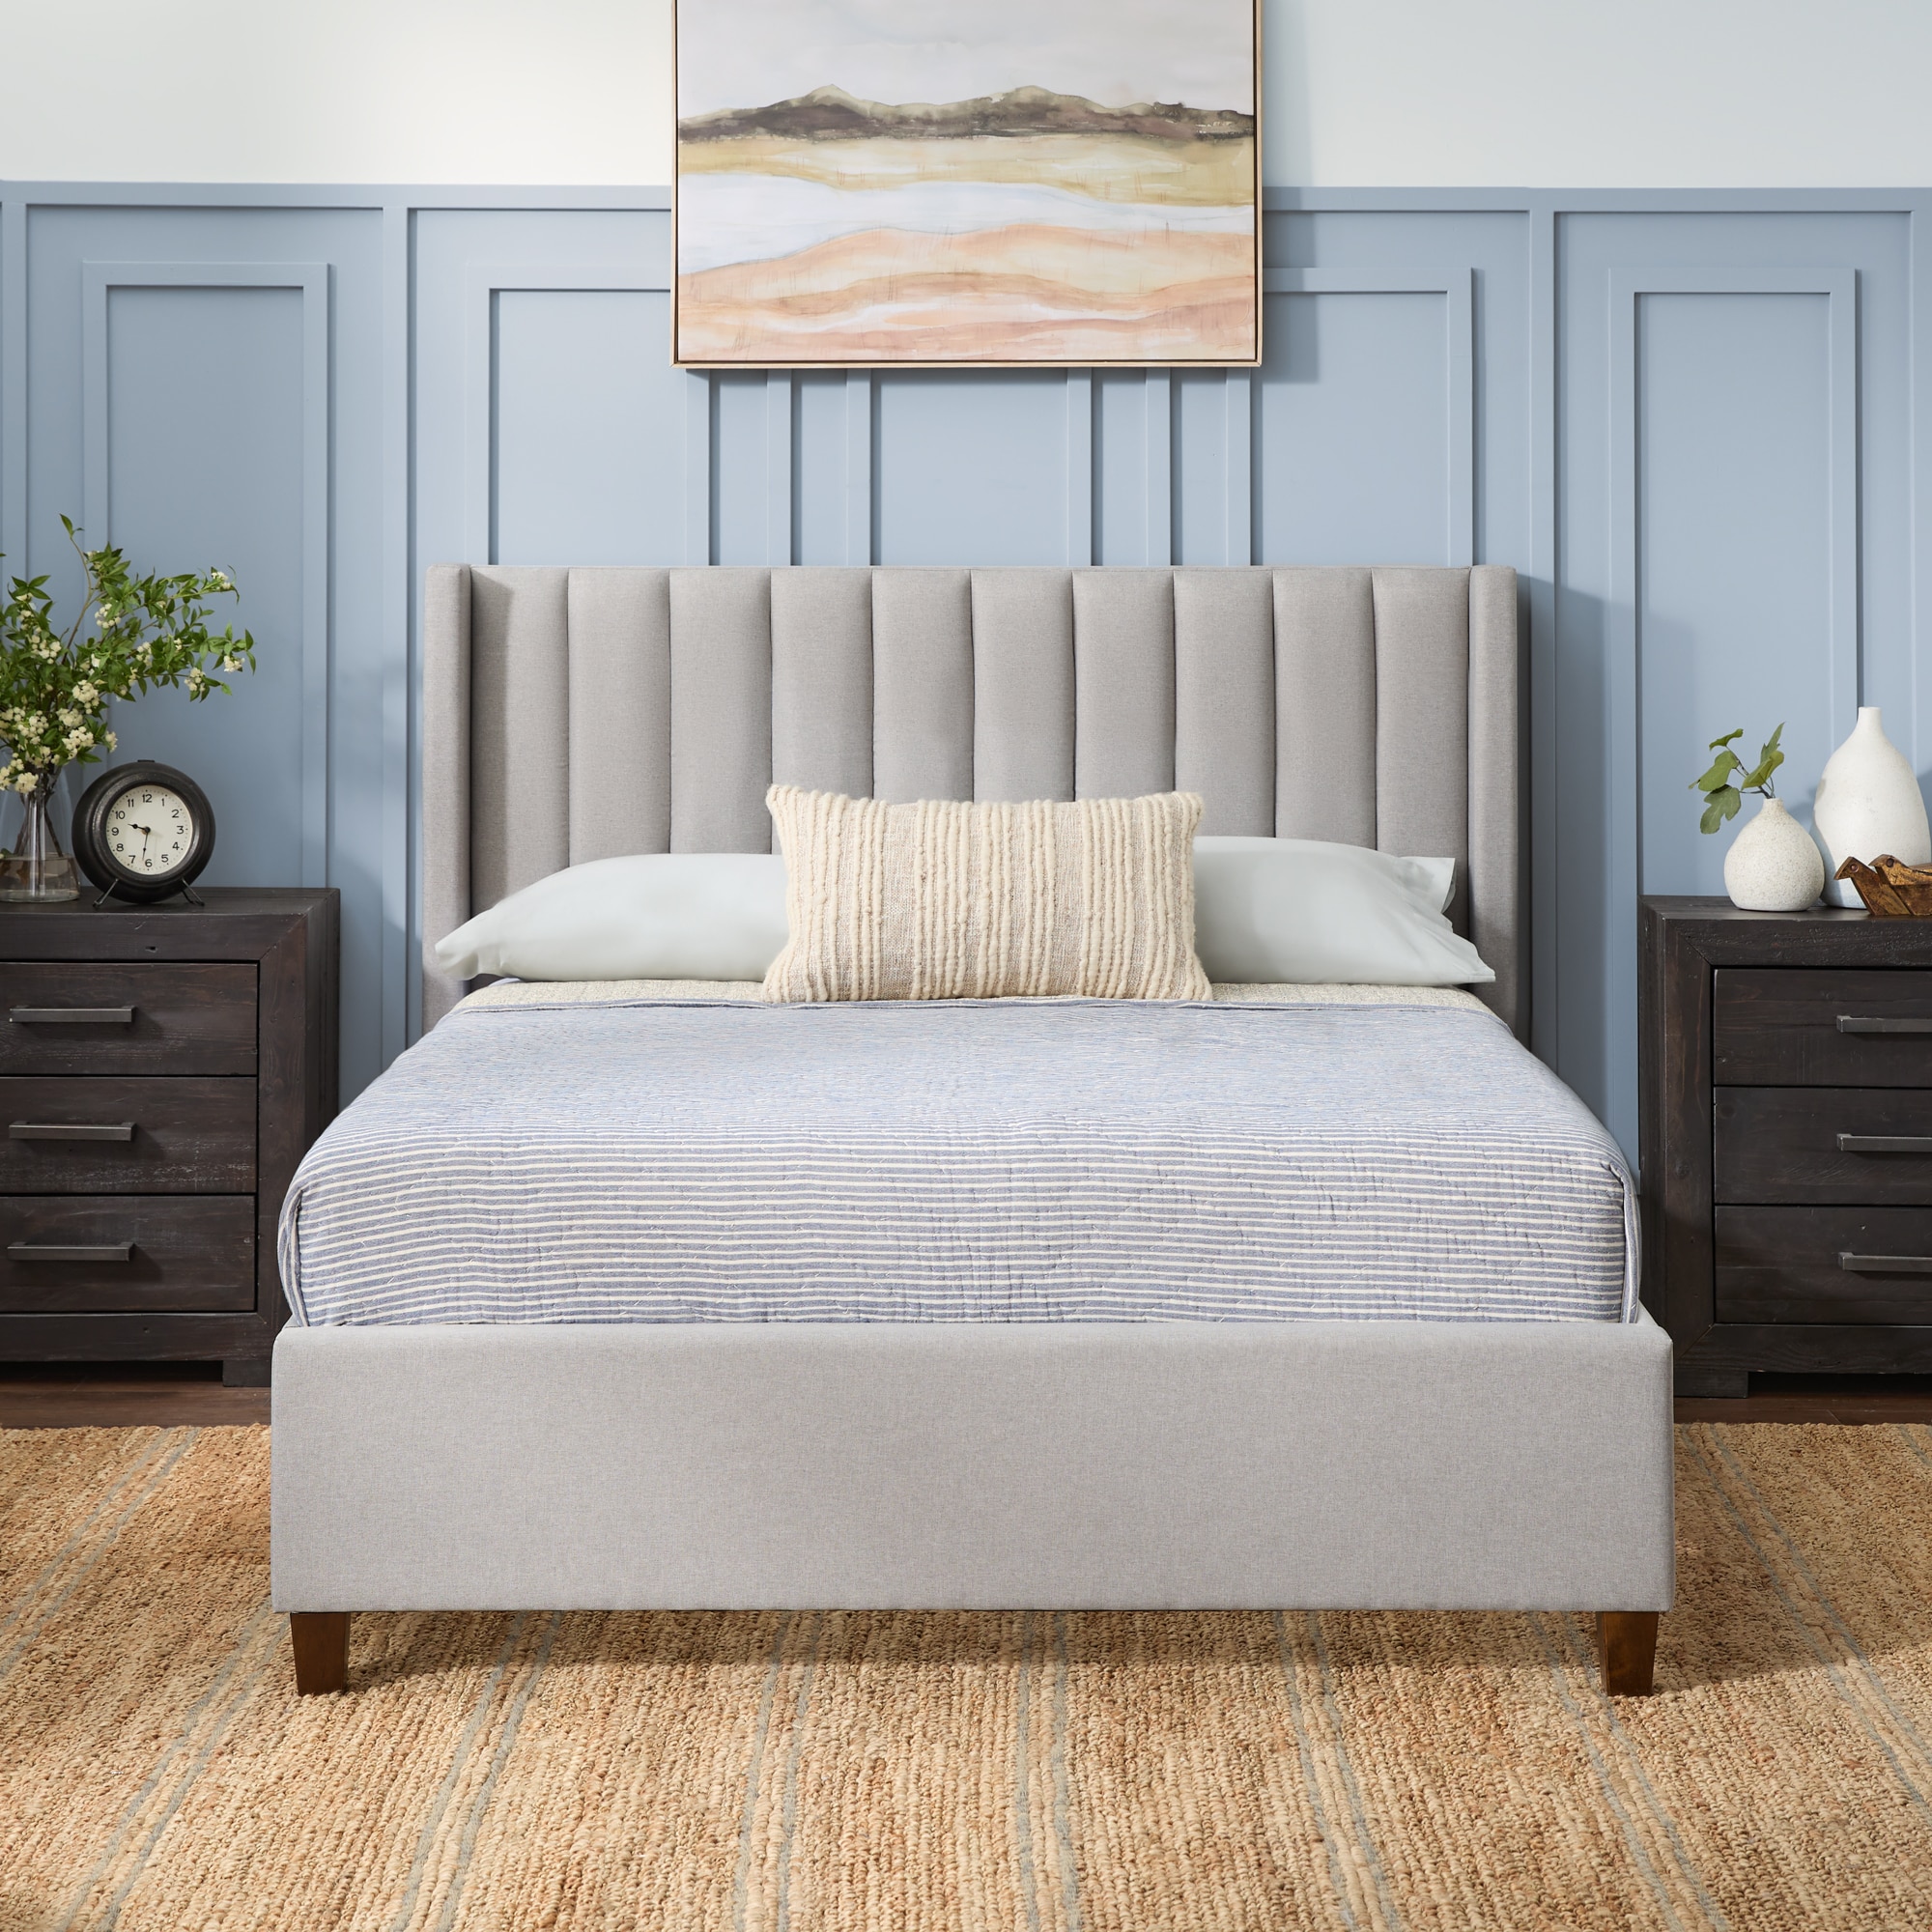 2 Pieces Bedroom Furniture Set,Queen Size Upholstered Bed Set with One  Nightstand,Velvet Platform Bed with line Stripe Wingback Headboard for